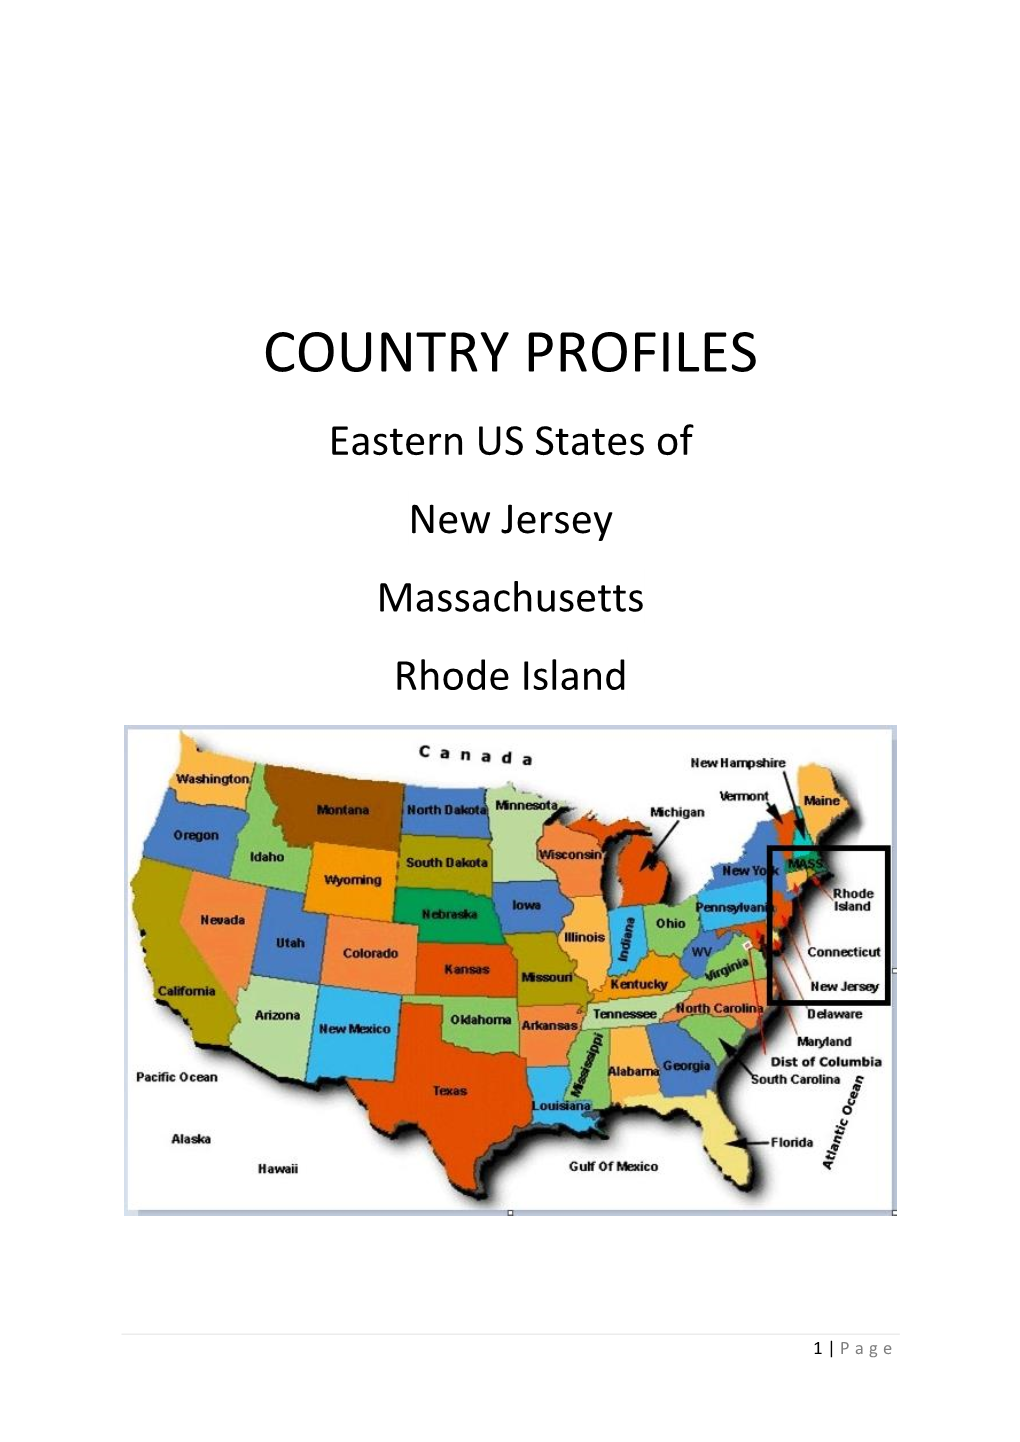 COUNTRY PROFILES Eastern US States of New Jersey Massachusetts Rhode Island